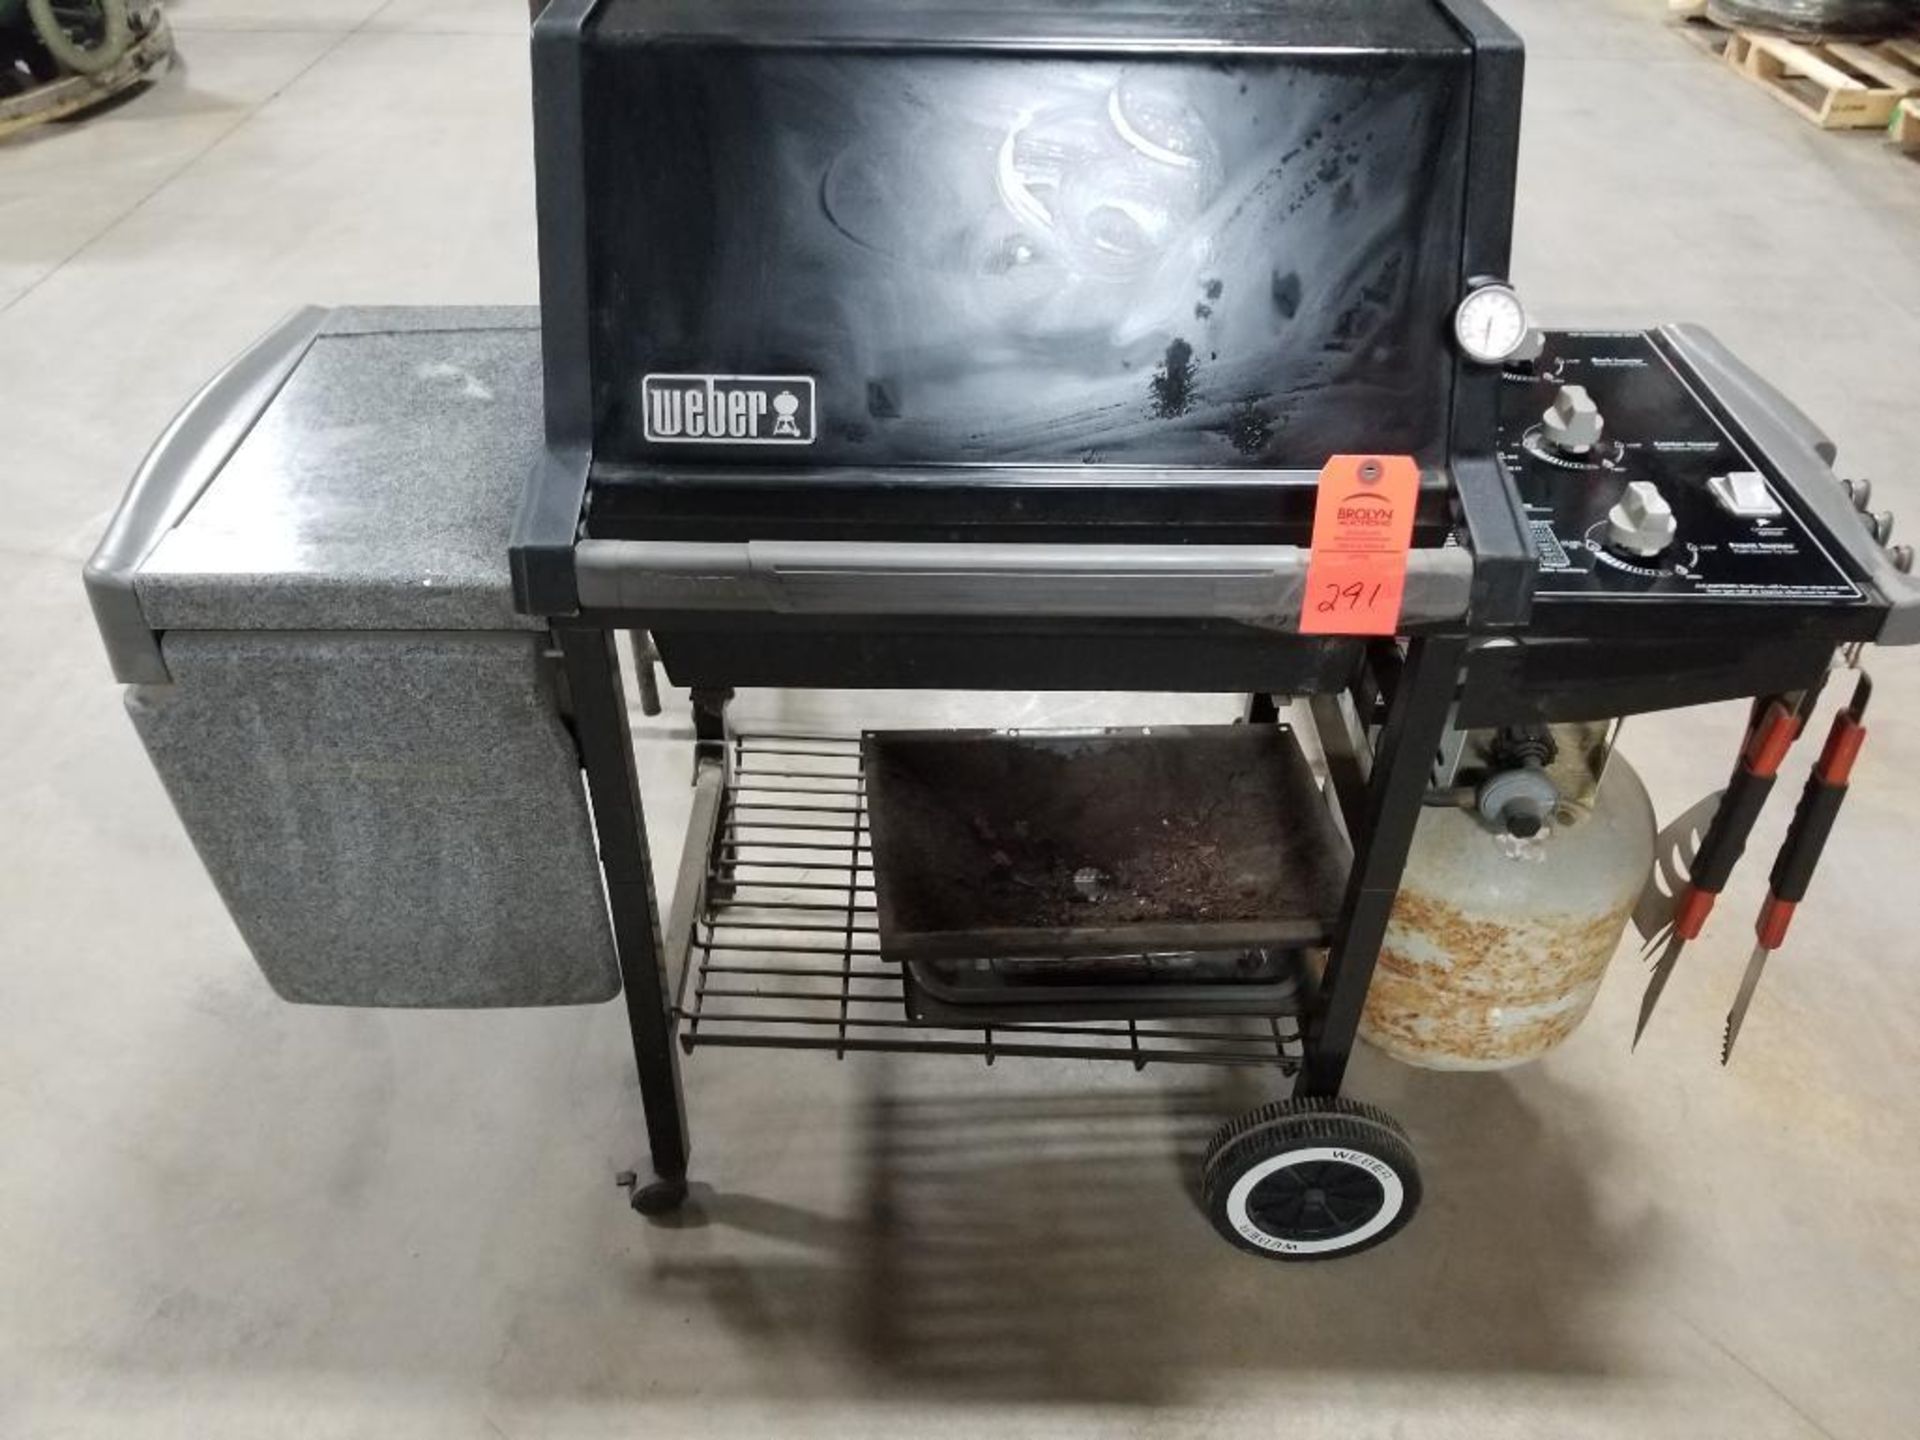 Weber Genesis Silver LP gas grill and accessories.